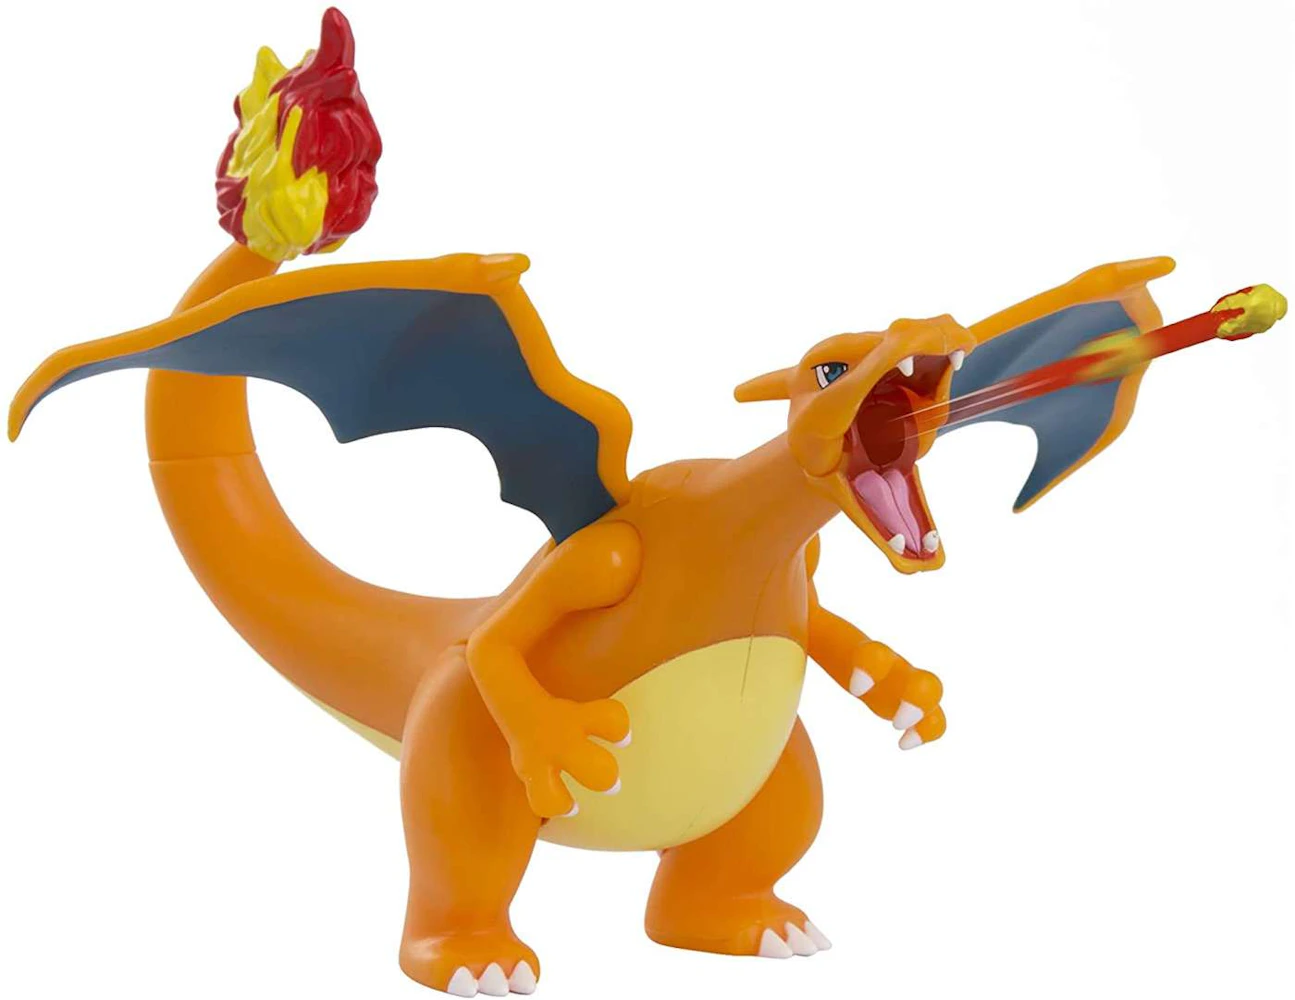 Pokemon Battle Feature Figure Assortment by Wicked Cool Toys